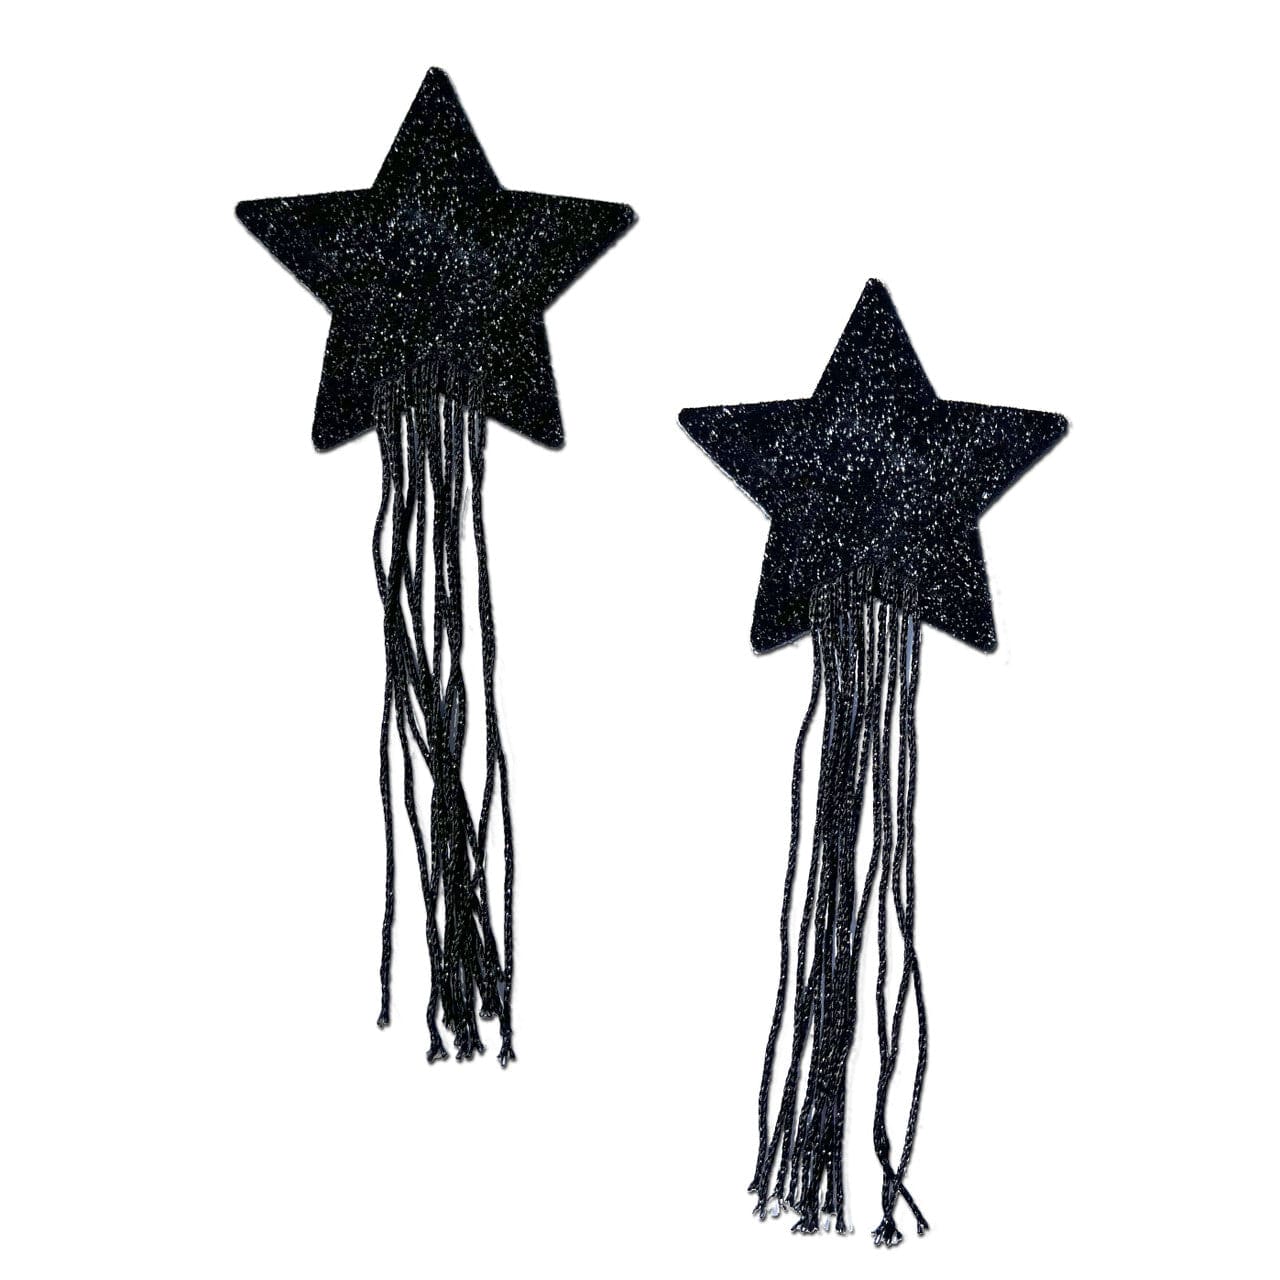 Pastease Pasties Black Pastease Tassel Pasties: Black Sparkle Star with Long Fringe Nipple Pasties at the Haus of Shag